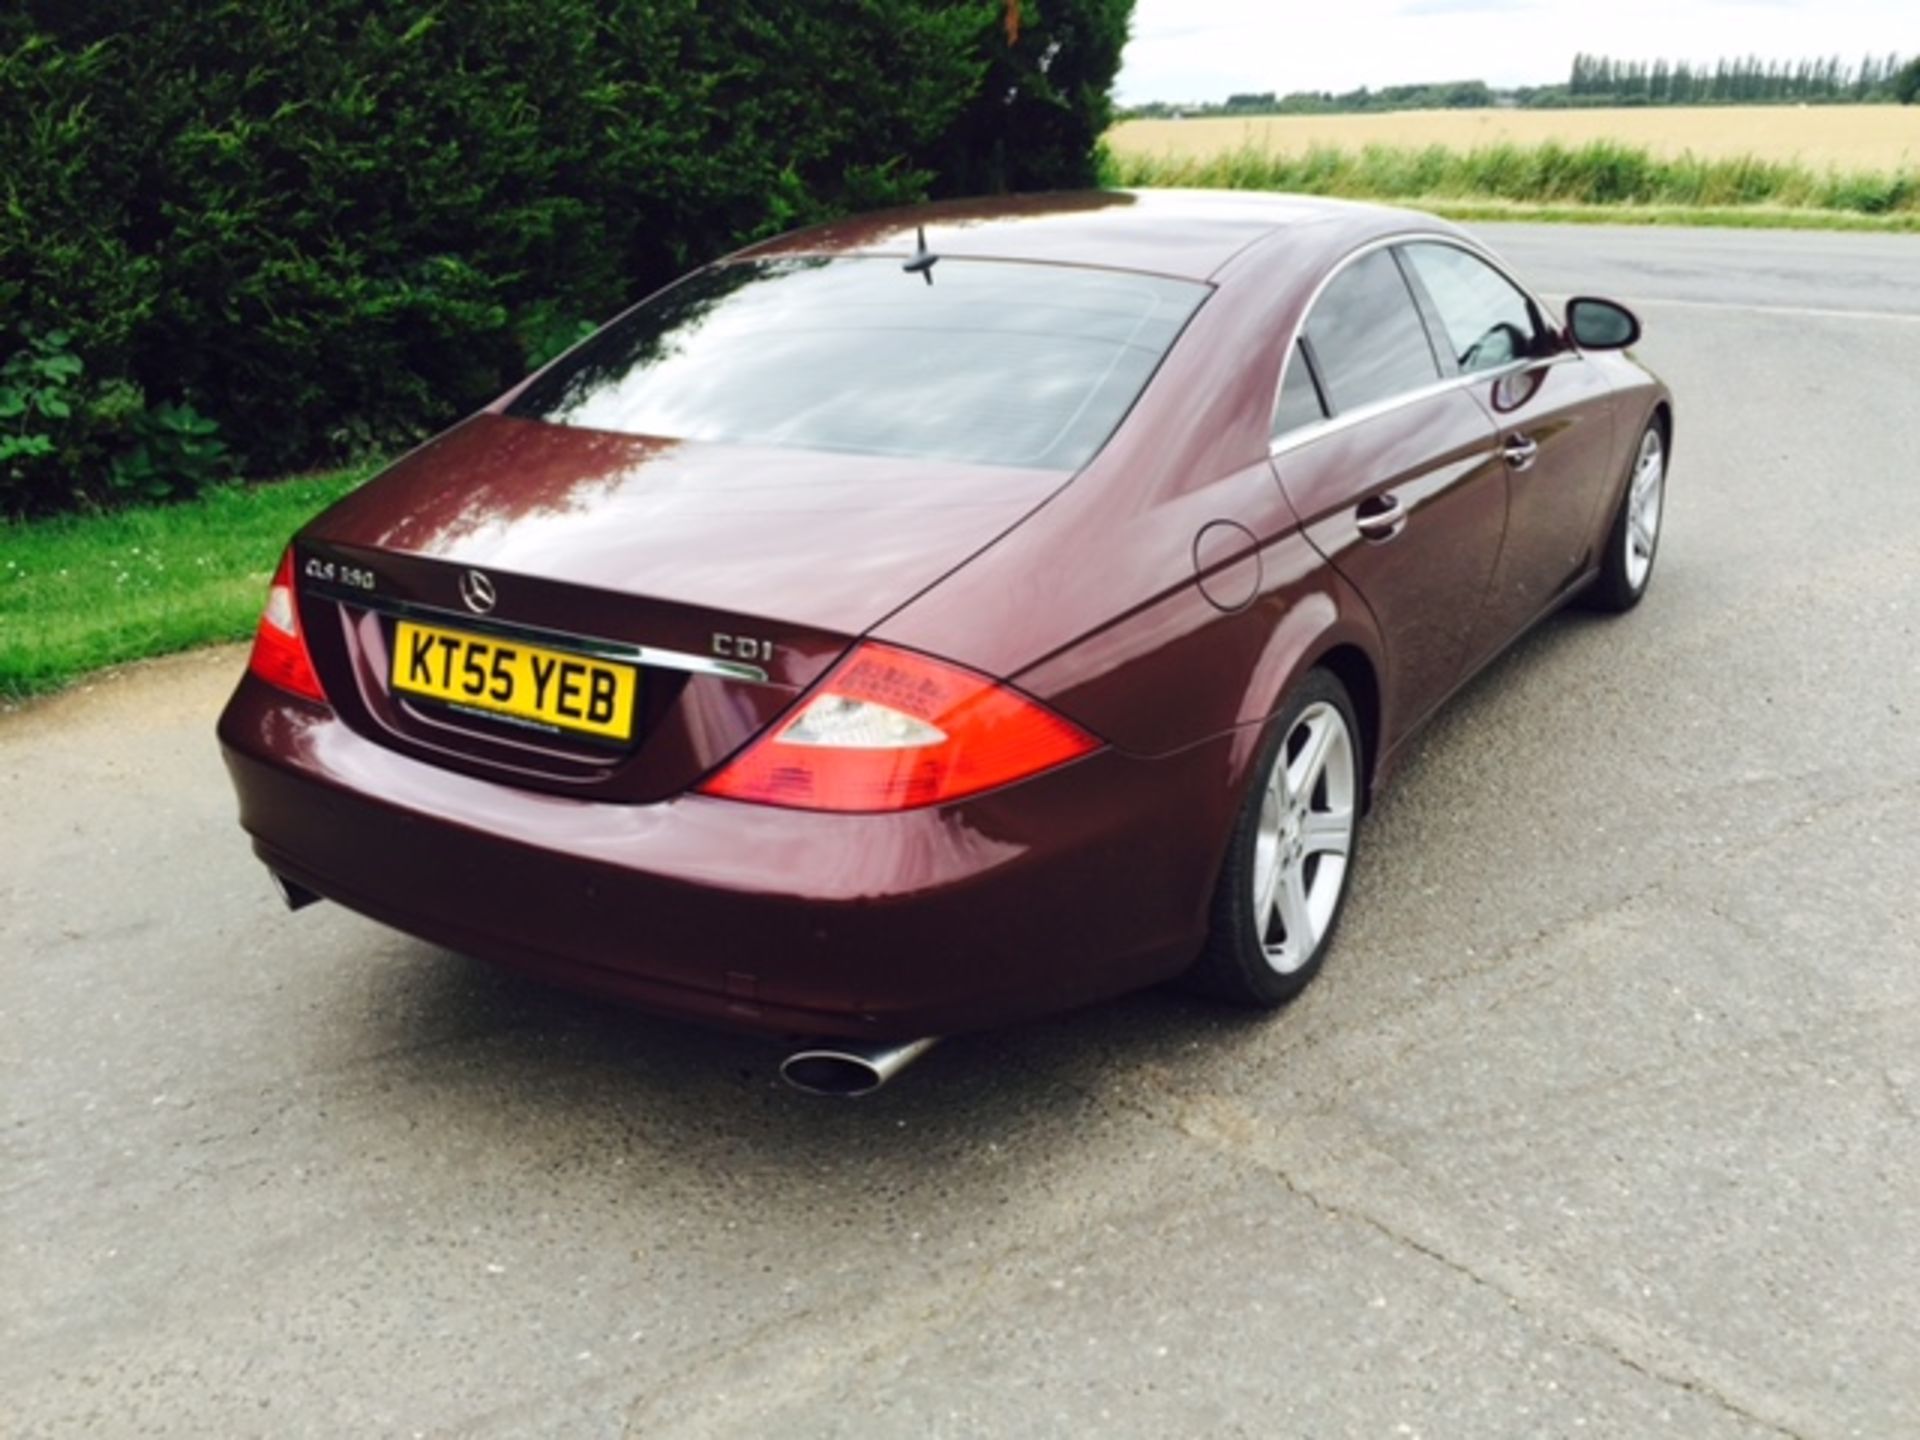 '55' Mercedes CLS 320CDI Coupe, Automatic, MOT 26/05/2016,  272k miles, 12 Service Stamps. - Image 5 of 12